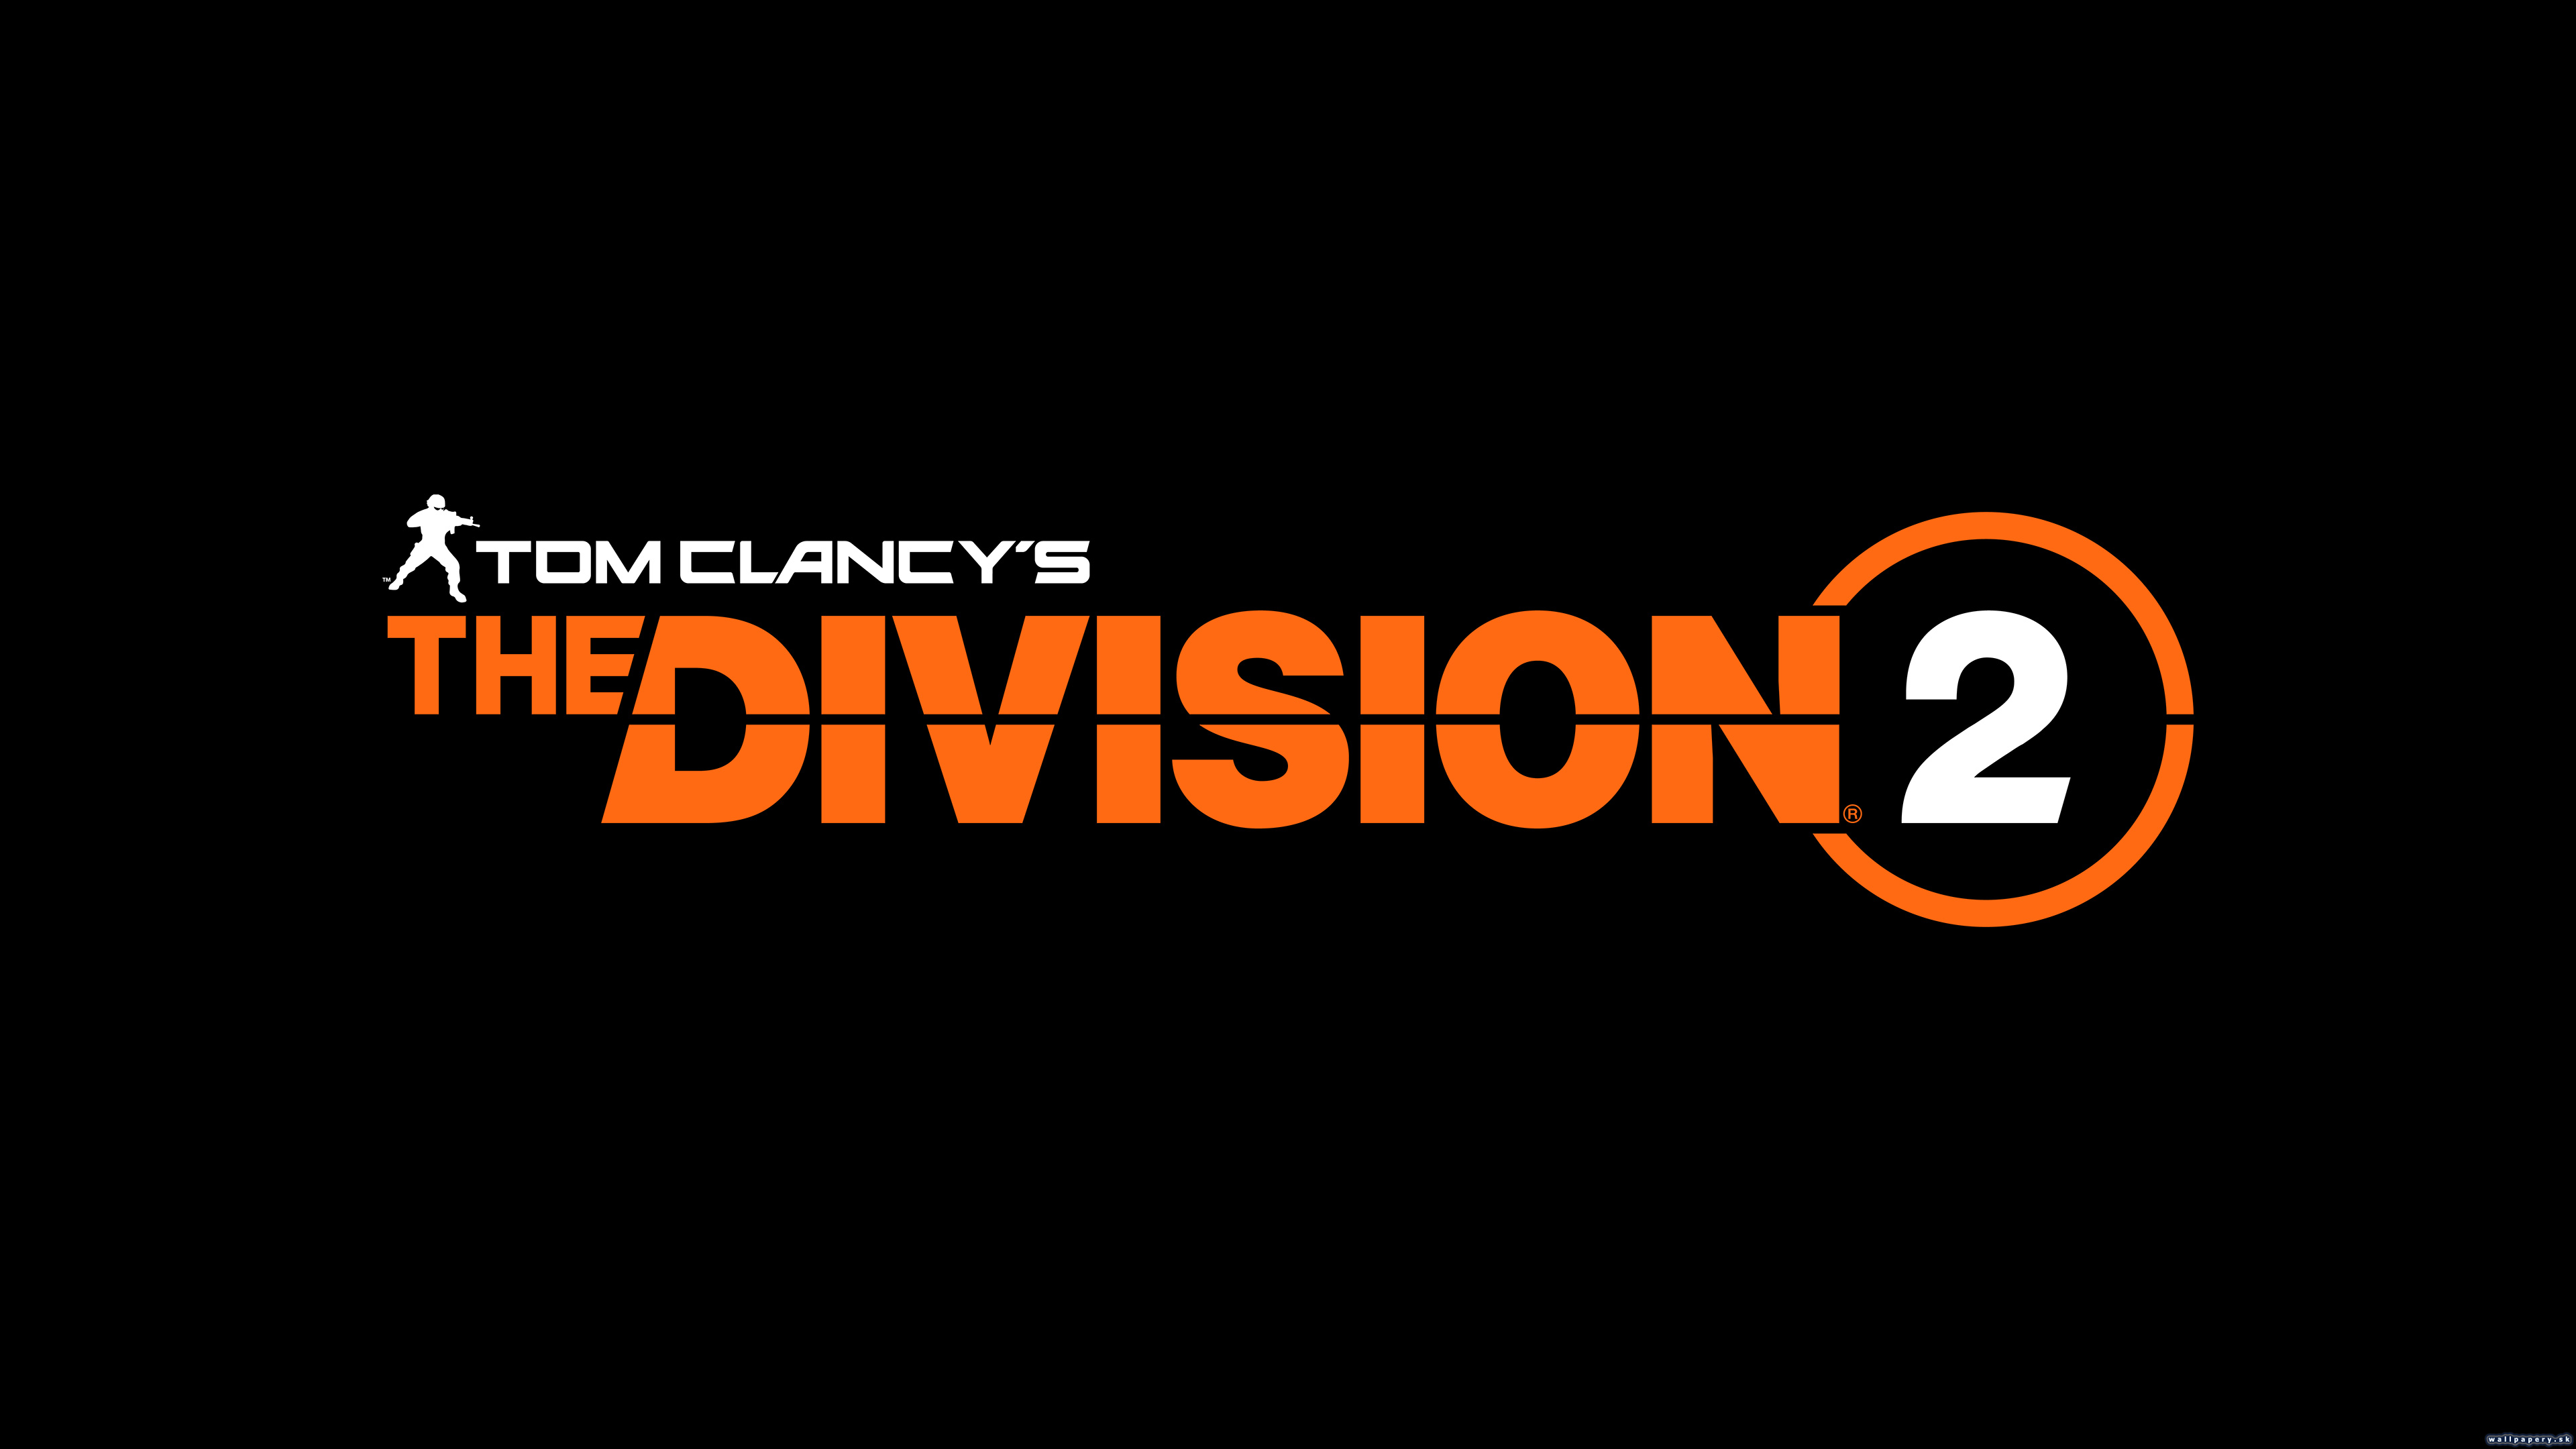 The Division 2 - wallpaper 3